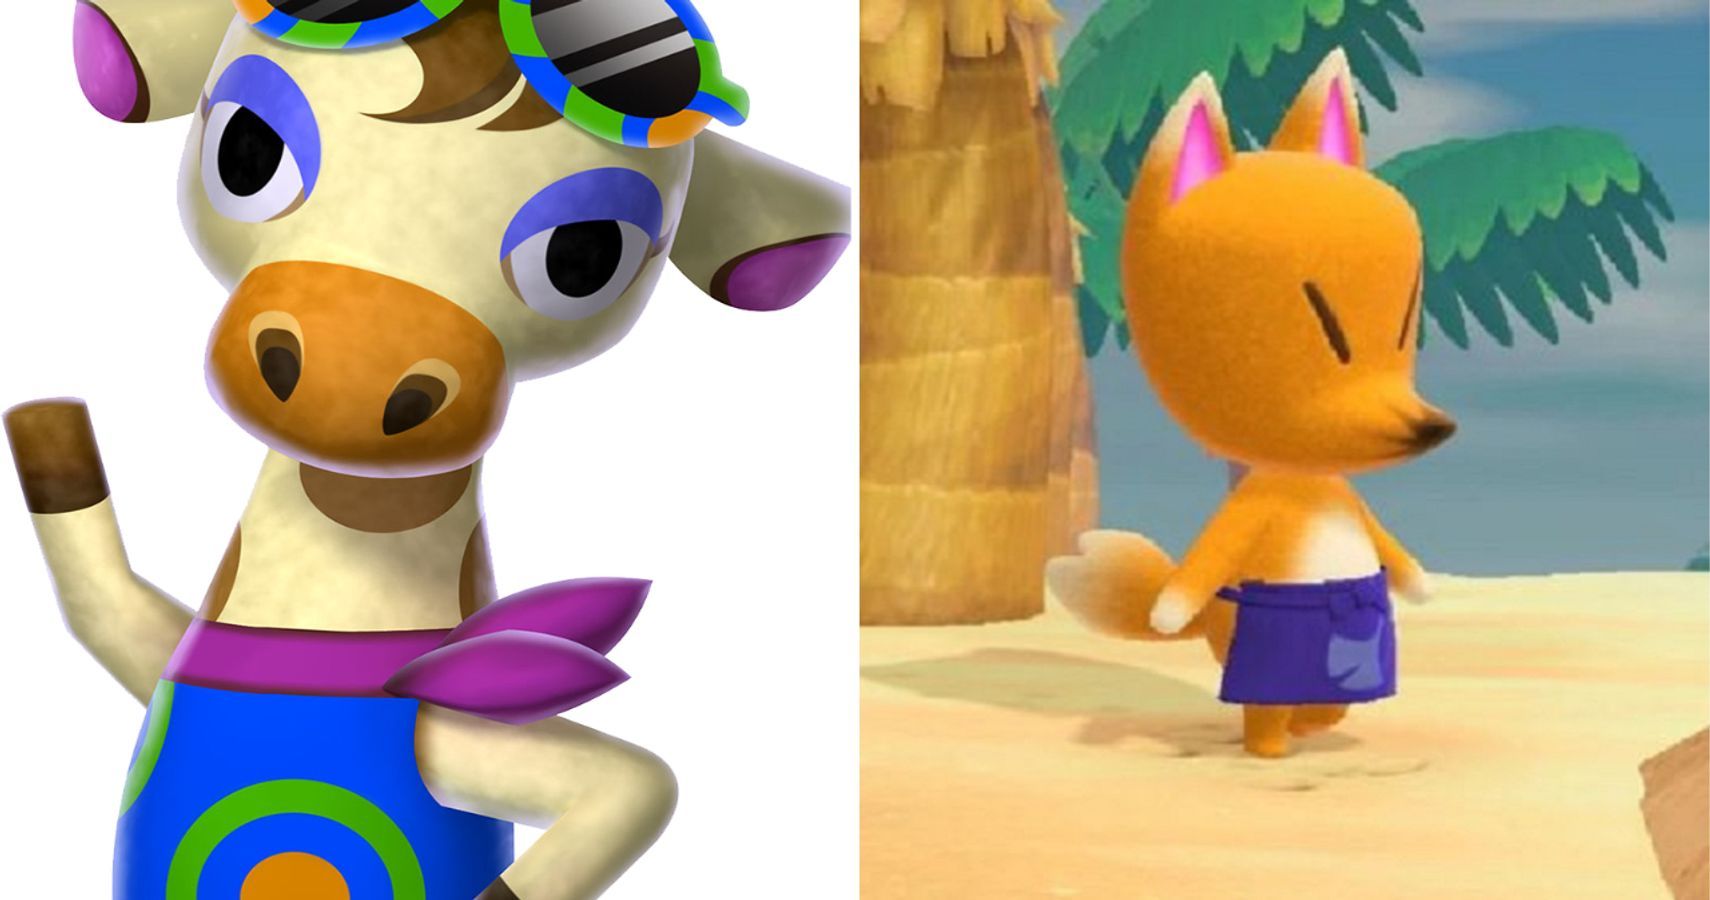 Animal Crossing: 10 Animals We Wish There Were Villagers Based On